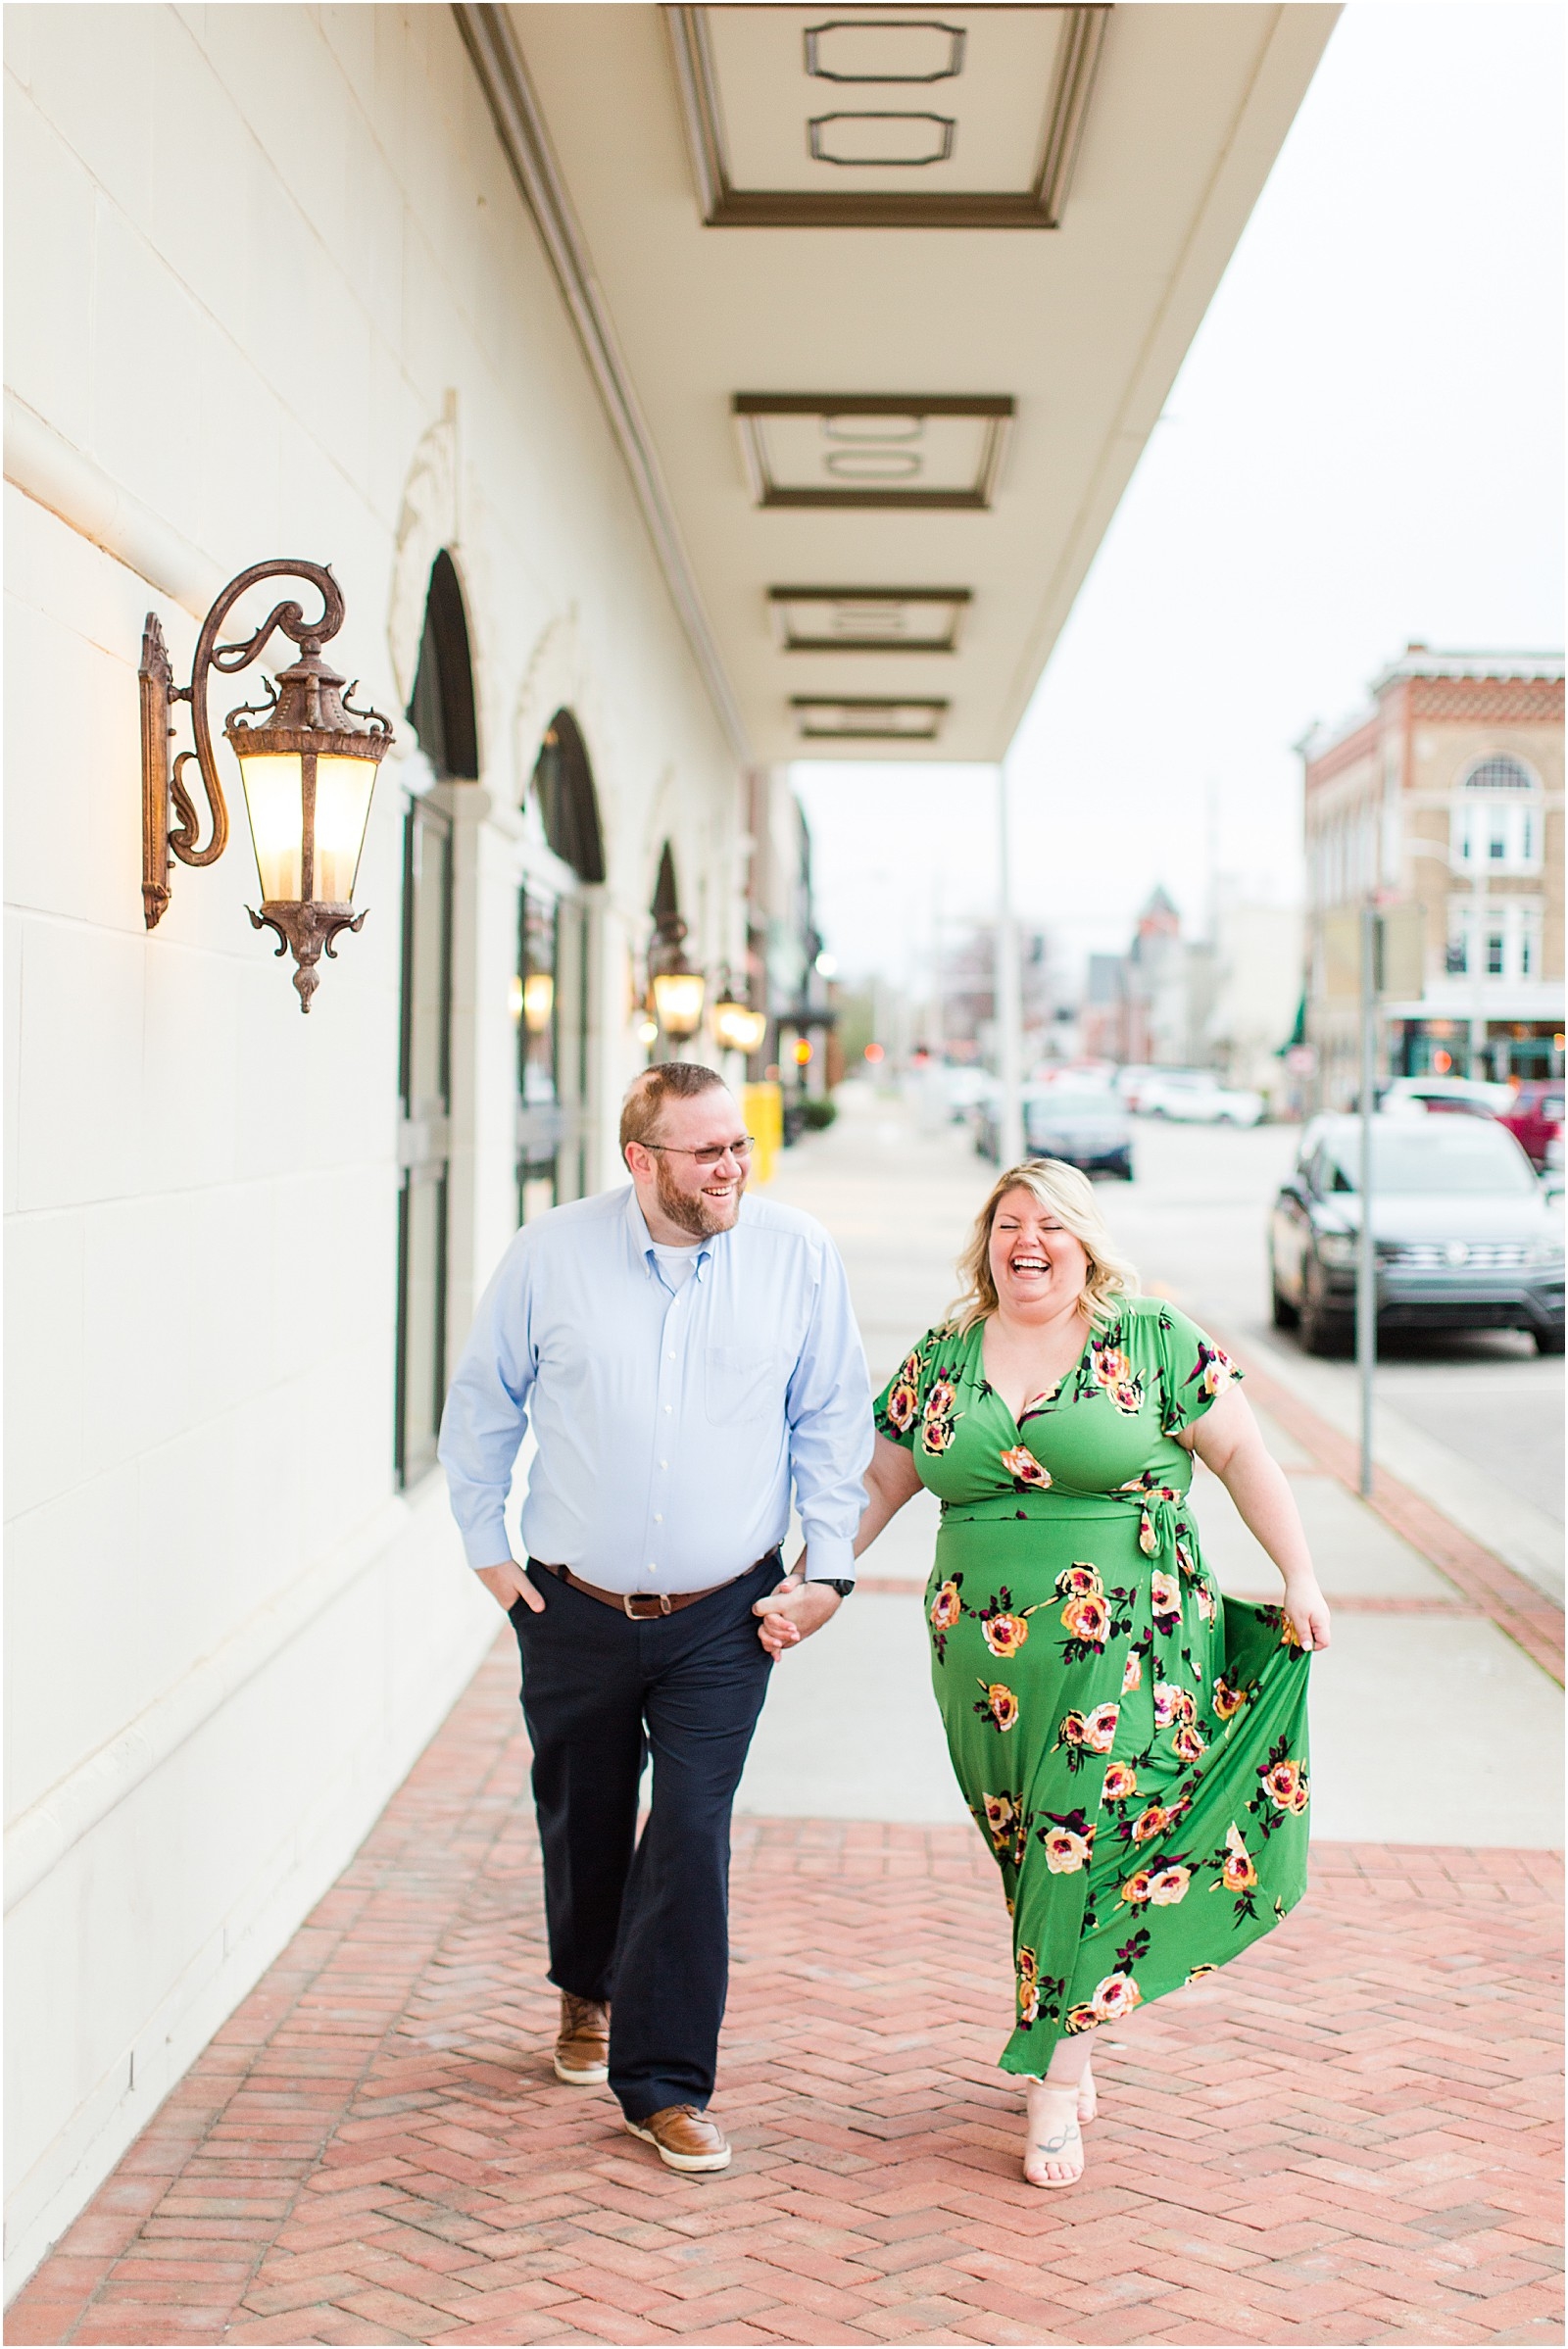 A Downtown Owensboro Engagement Session | Brittany and Neil | Engaged | | 0022.jpg